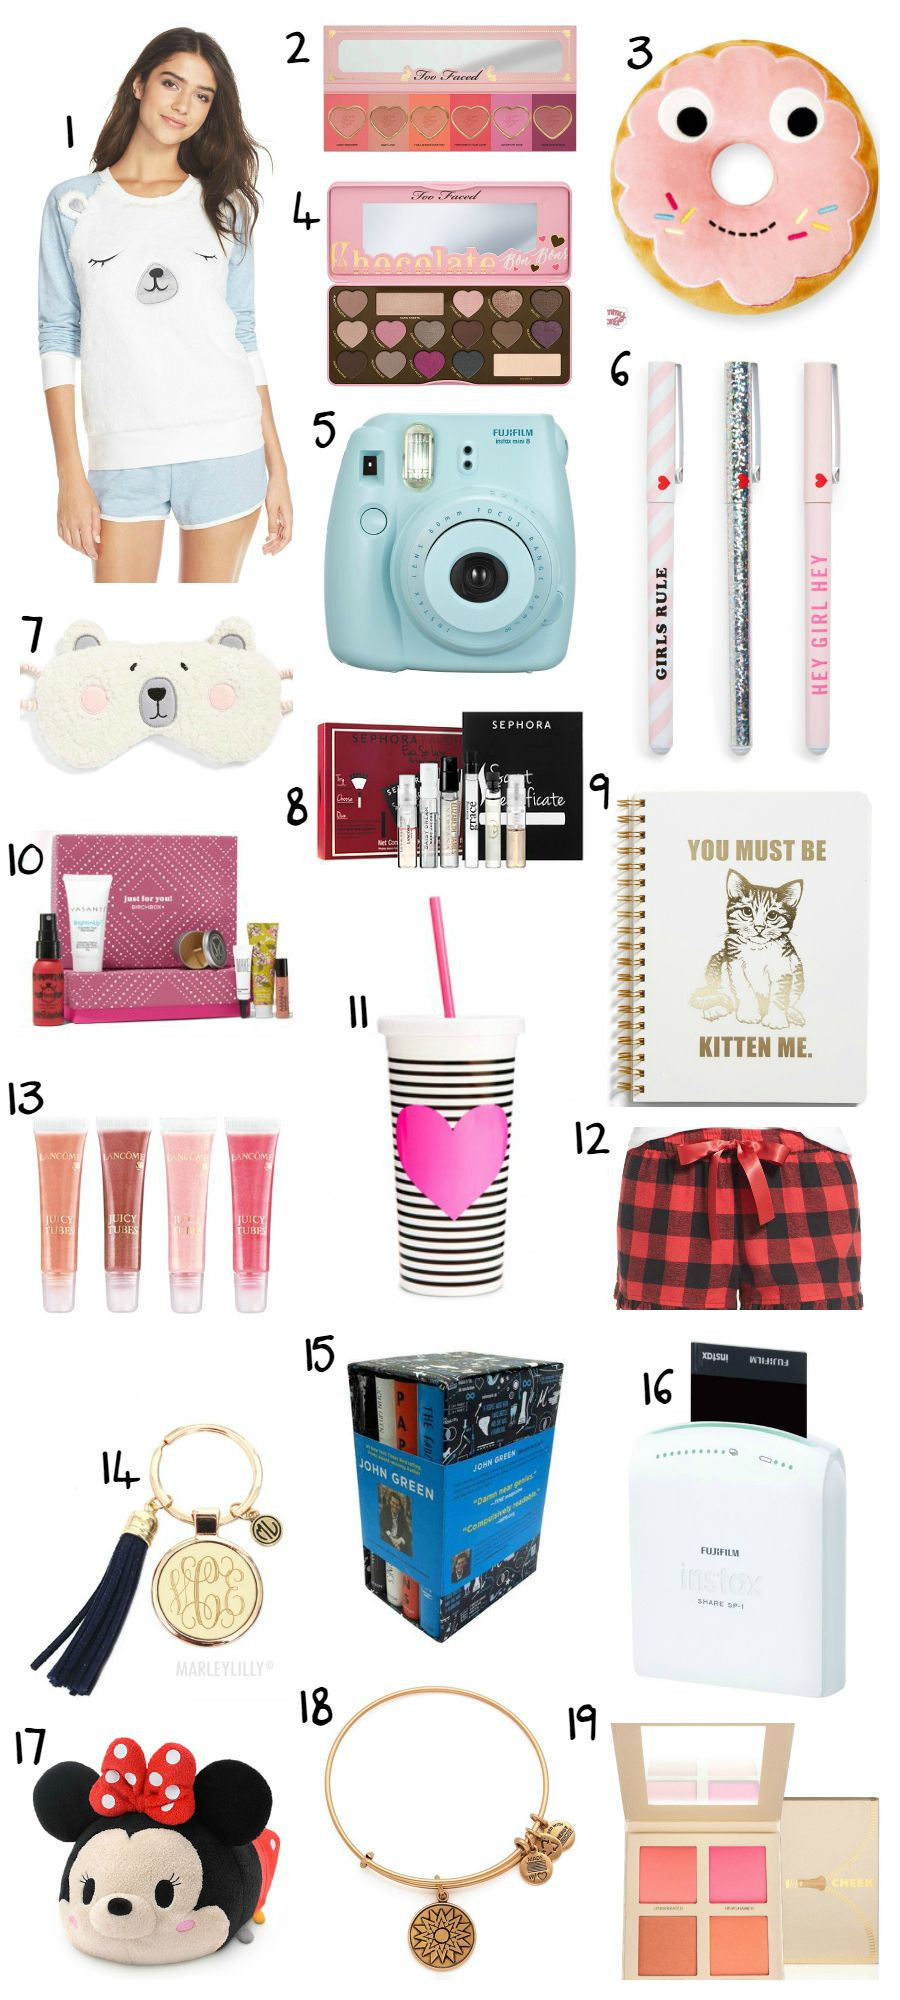 Christmas Gift Ideas For Teenage Girls
 The Best Christmas Gift Ideas for Teens